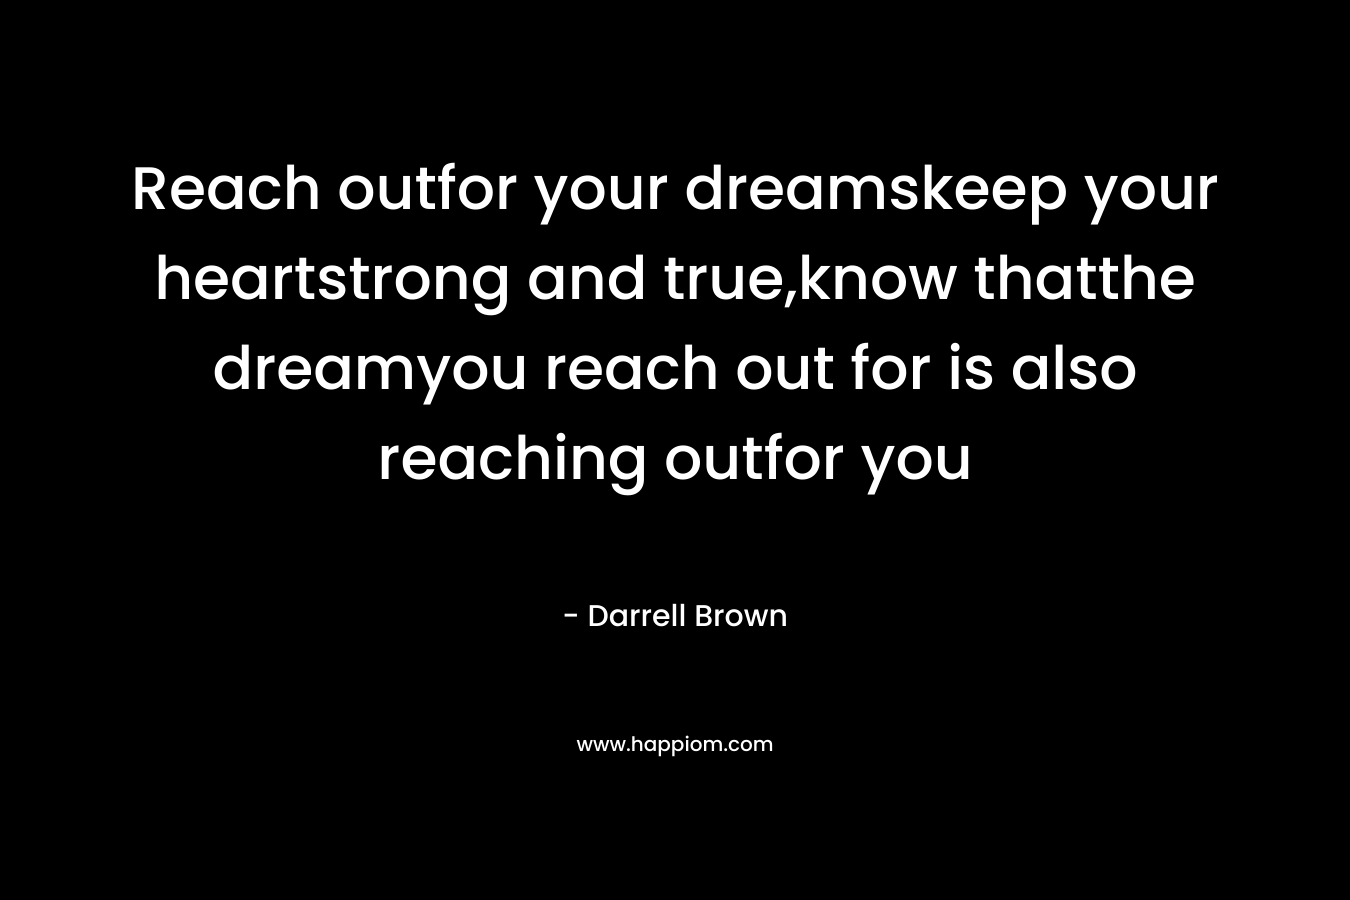 Reach outfor your dreamskeep your heartstrong and true,know thatthe dreamyou reach out for is also reaching outfor you